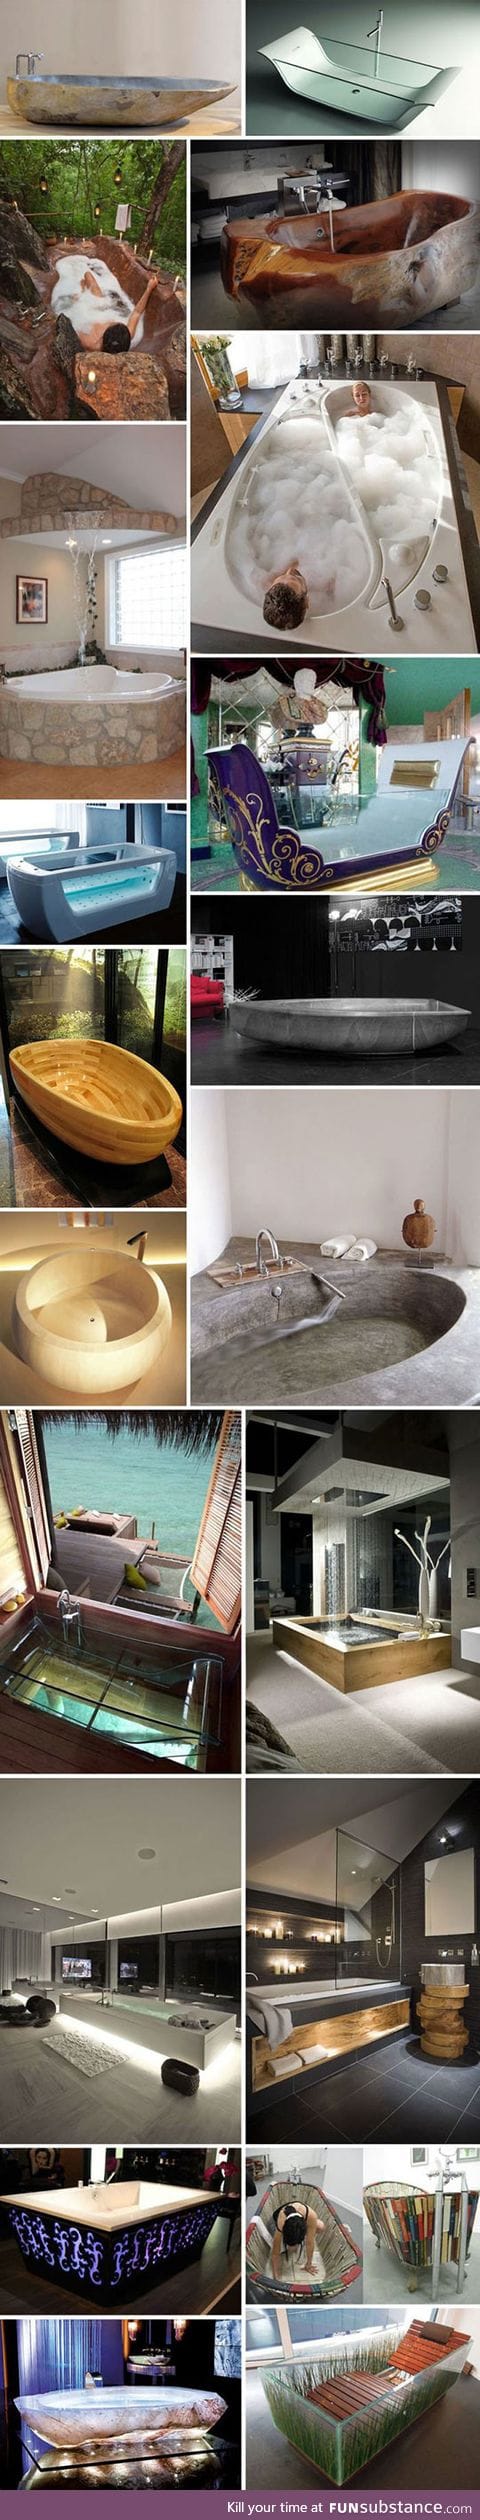 Bathtubs that make you want to jump in